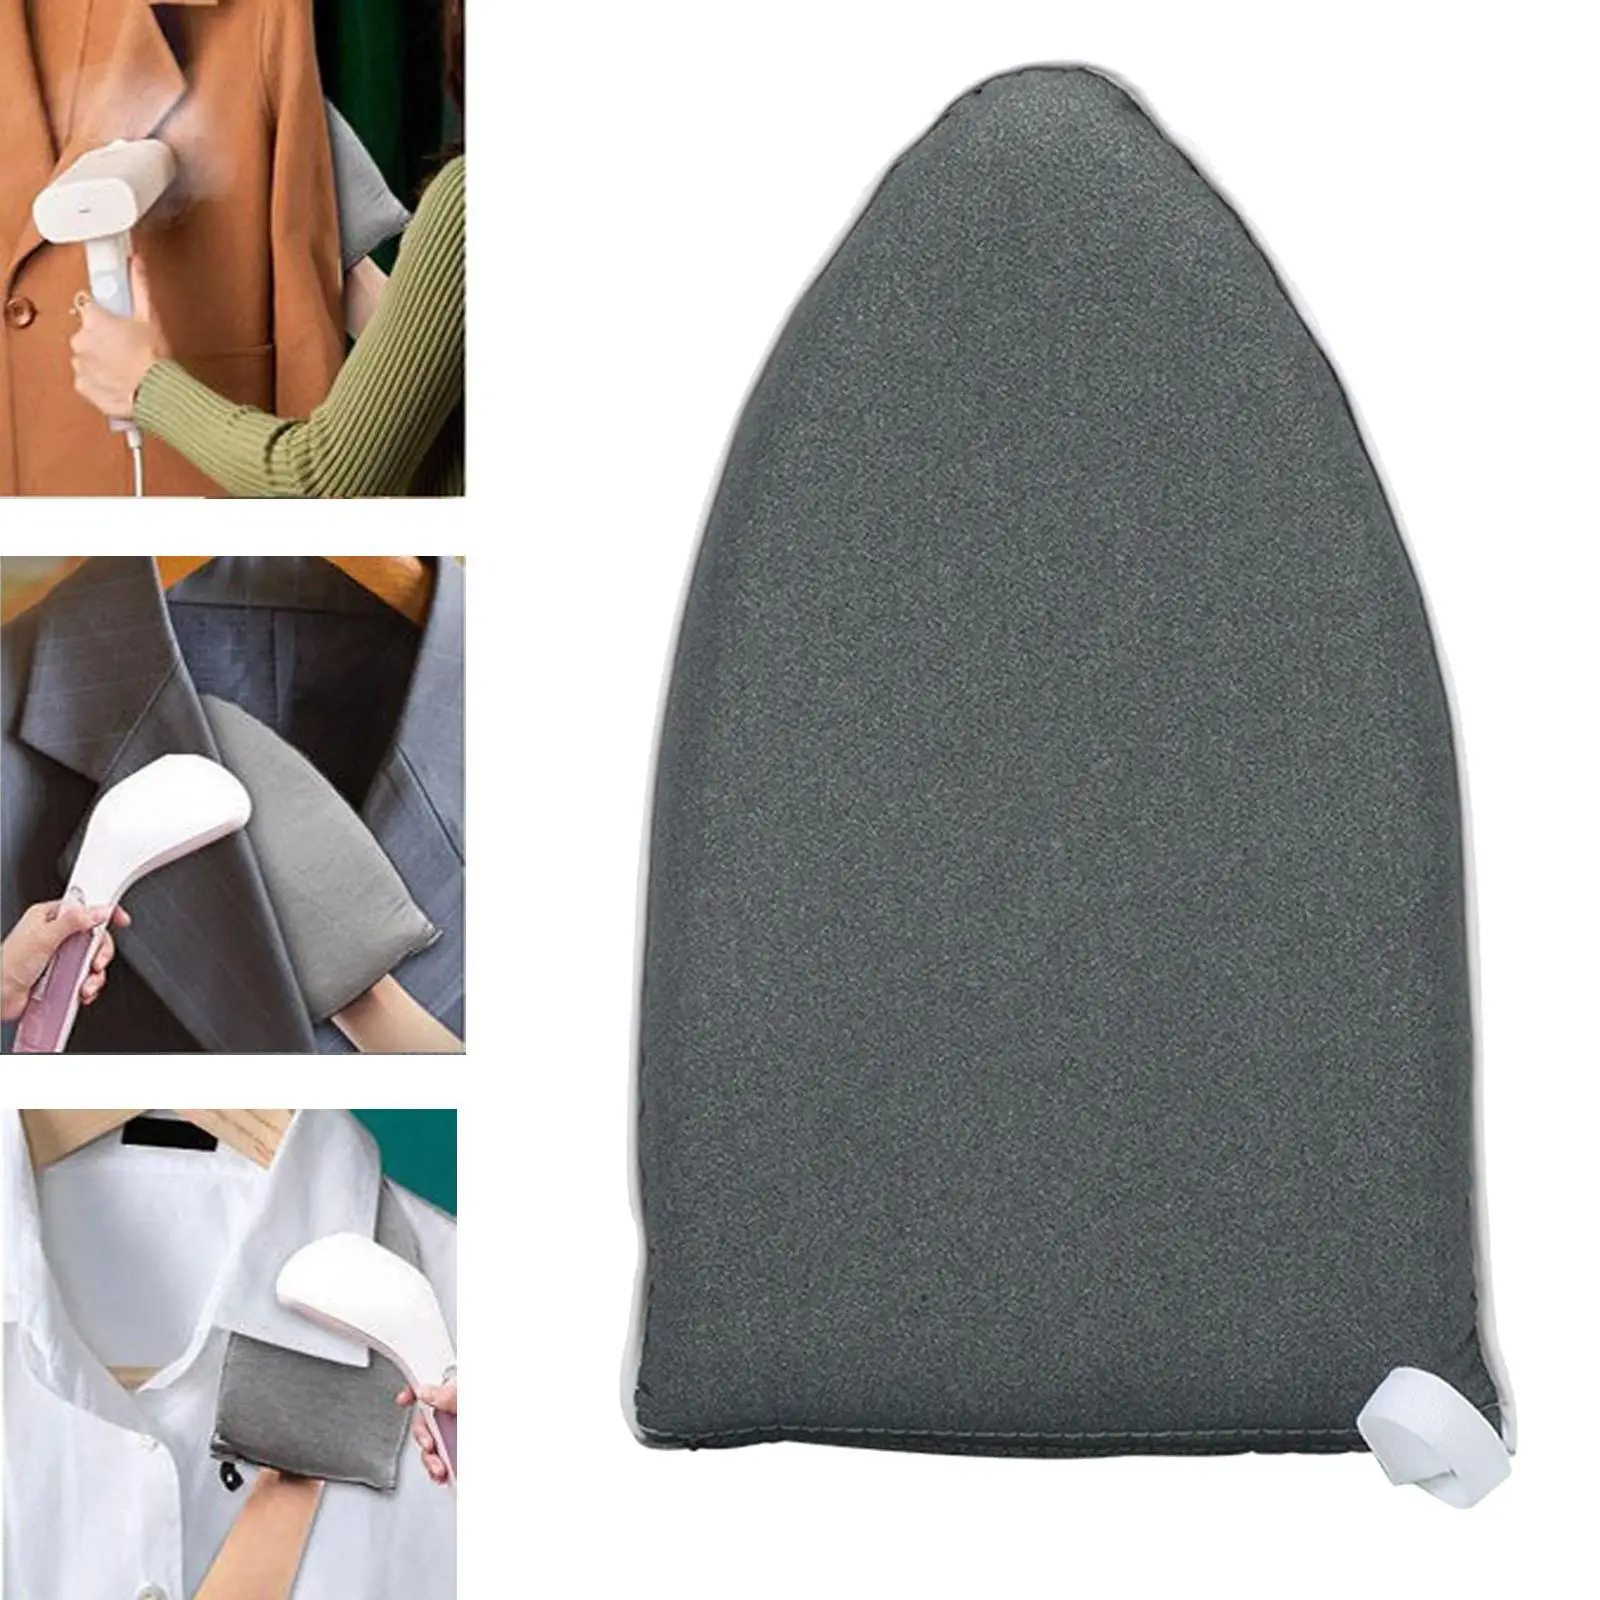 Portable Garment Steamer Ironing Gloves Ironing Board Holder Breathable Iron Table Rack Durable Ironing Clothes Gloves